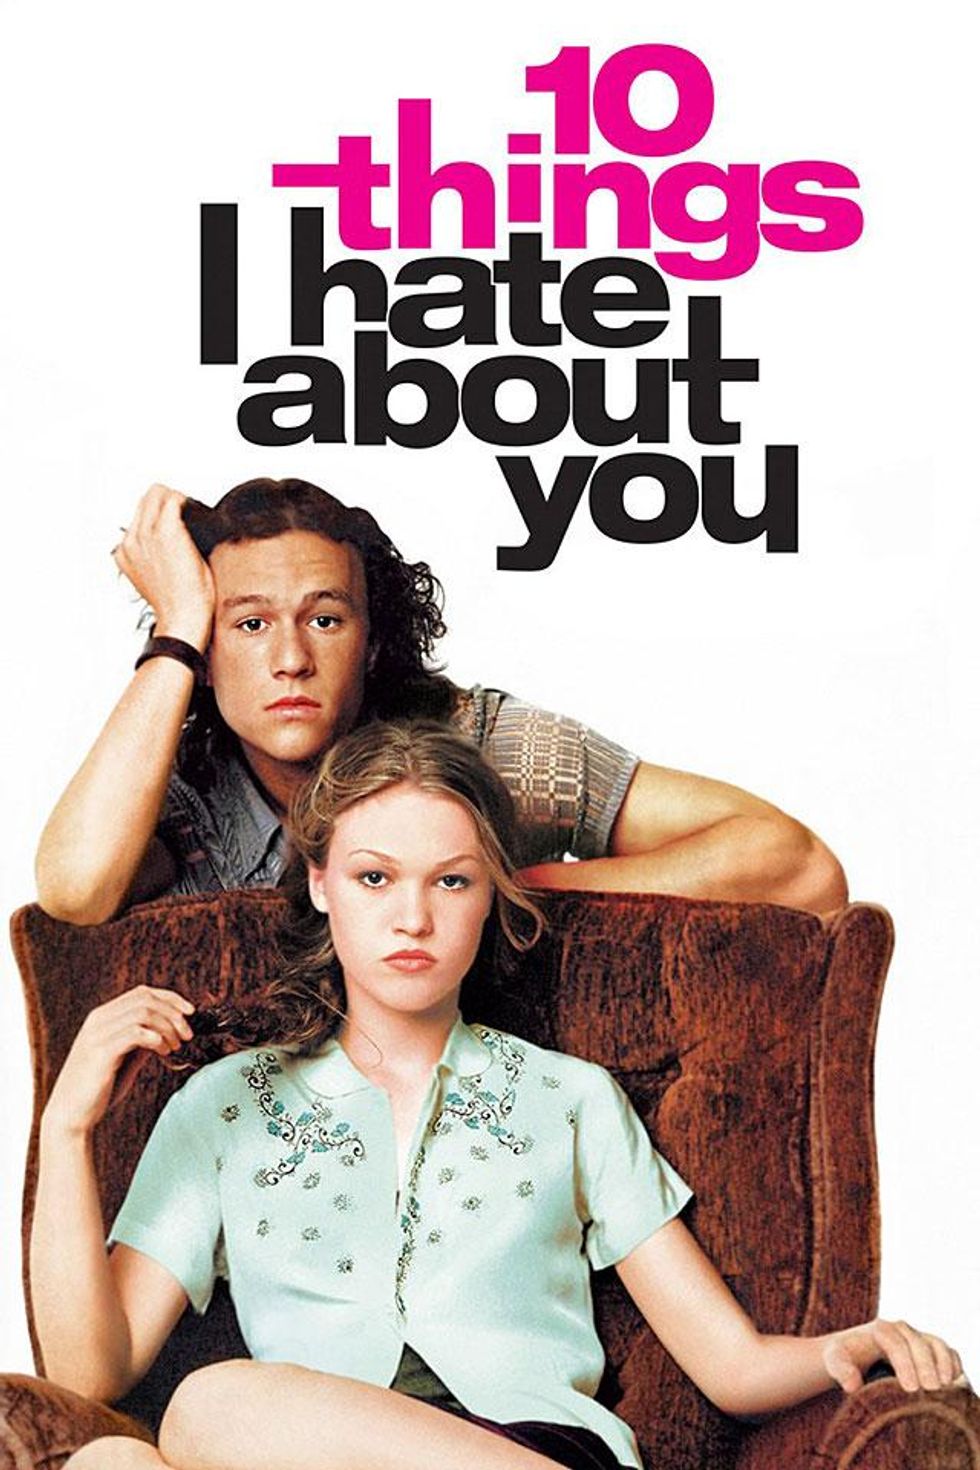 16. 10 Things I Hate About You